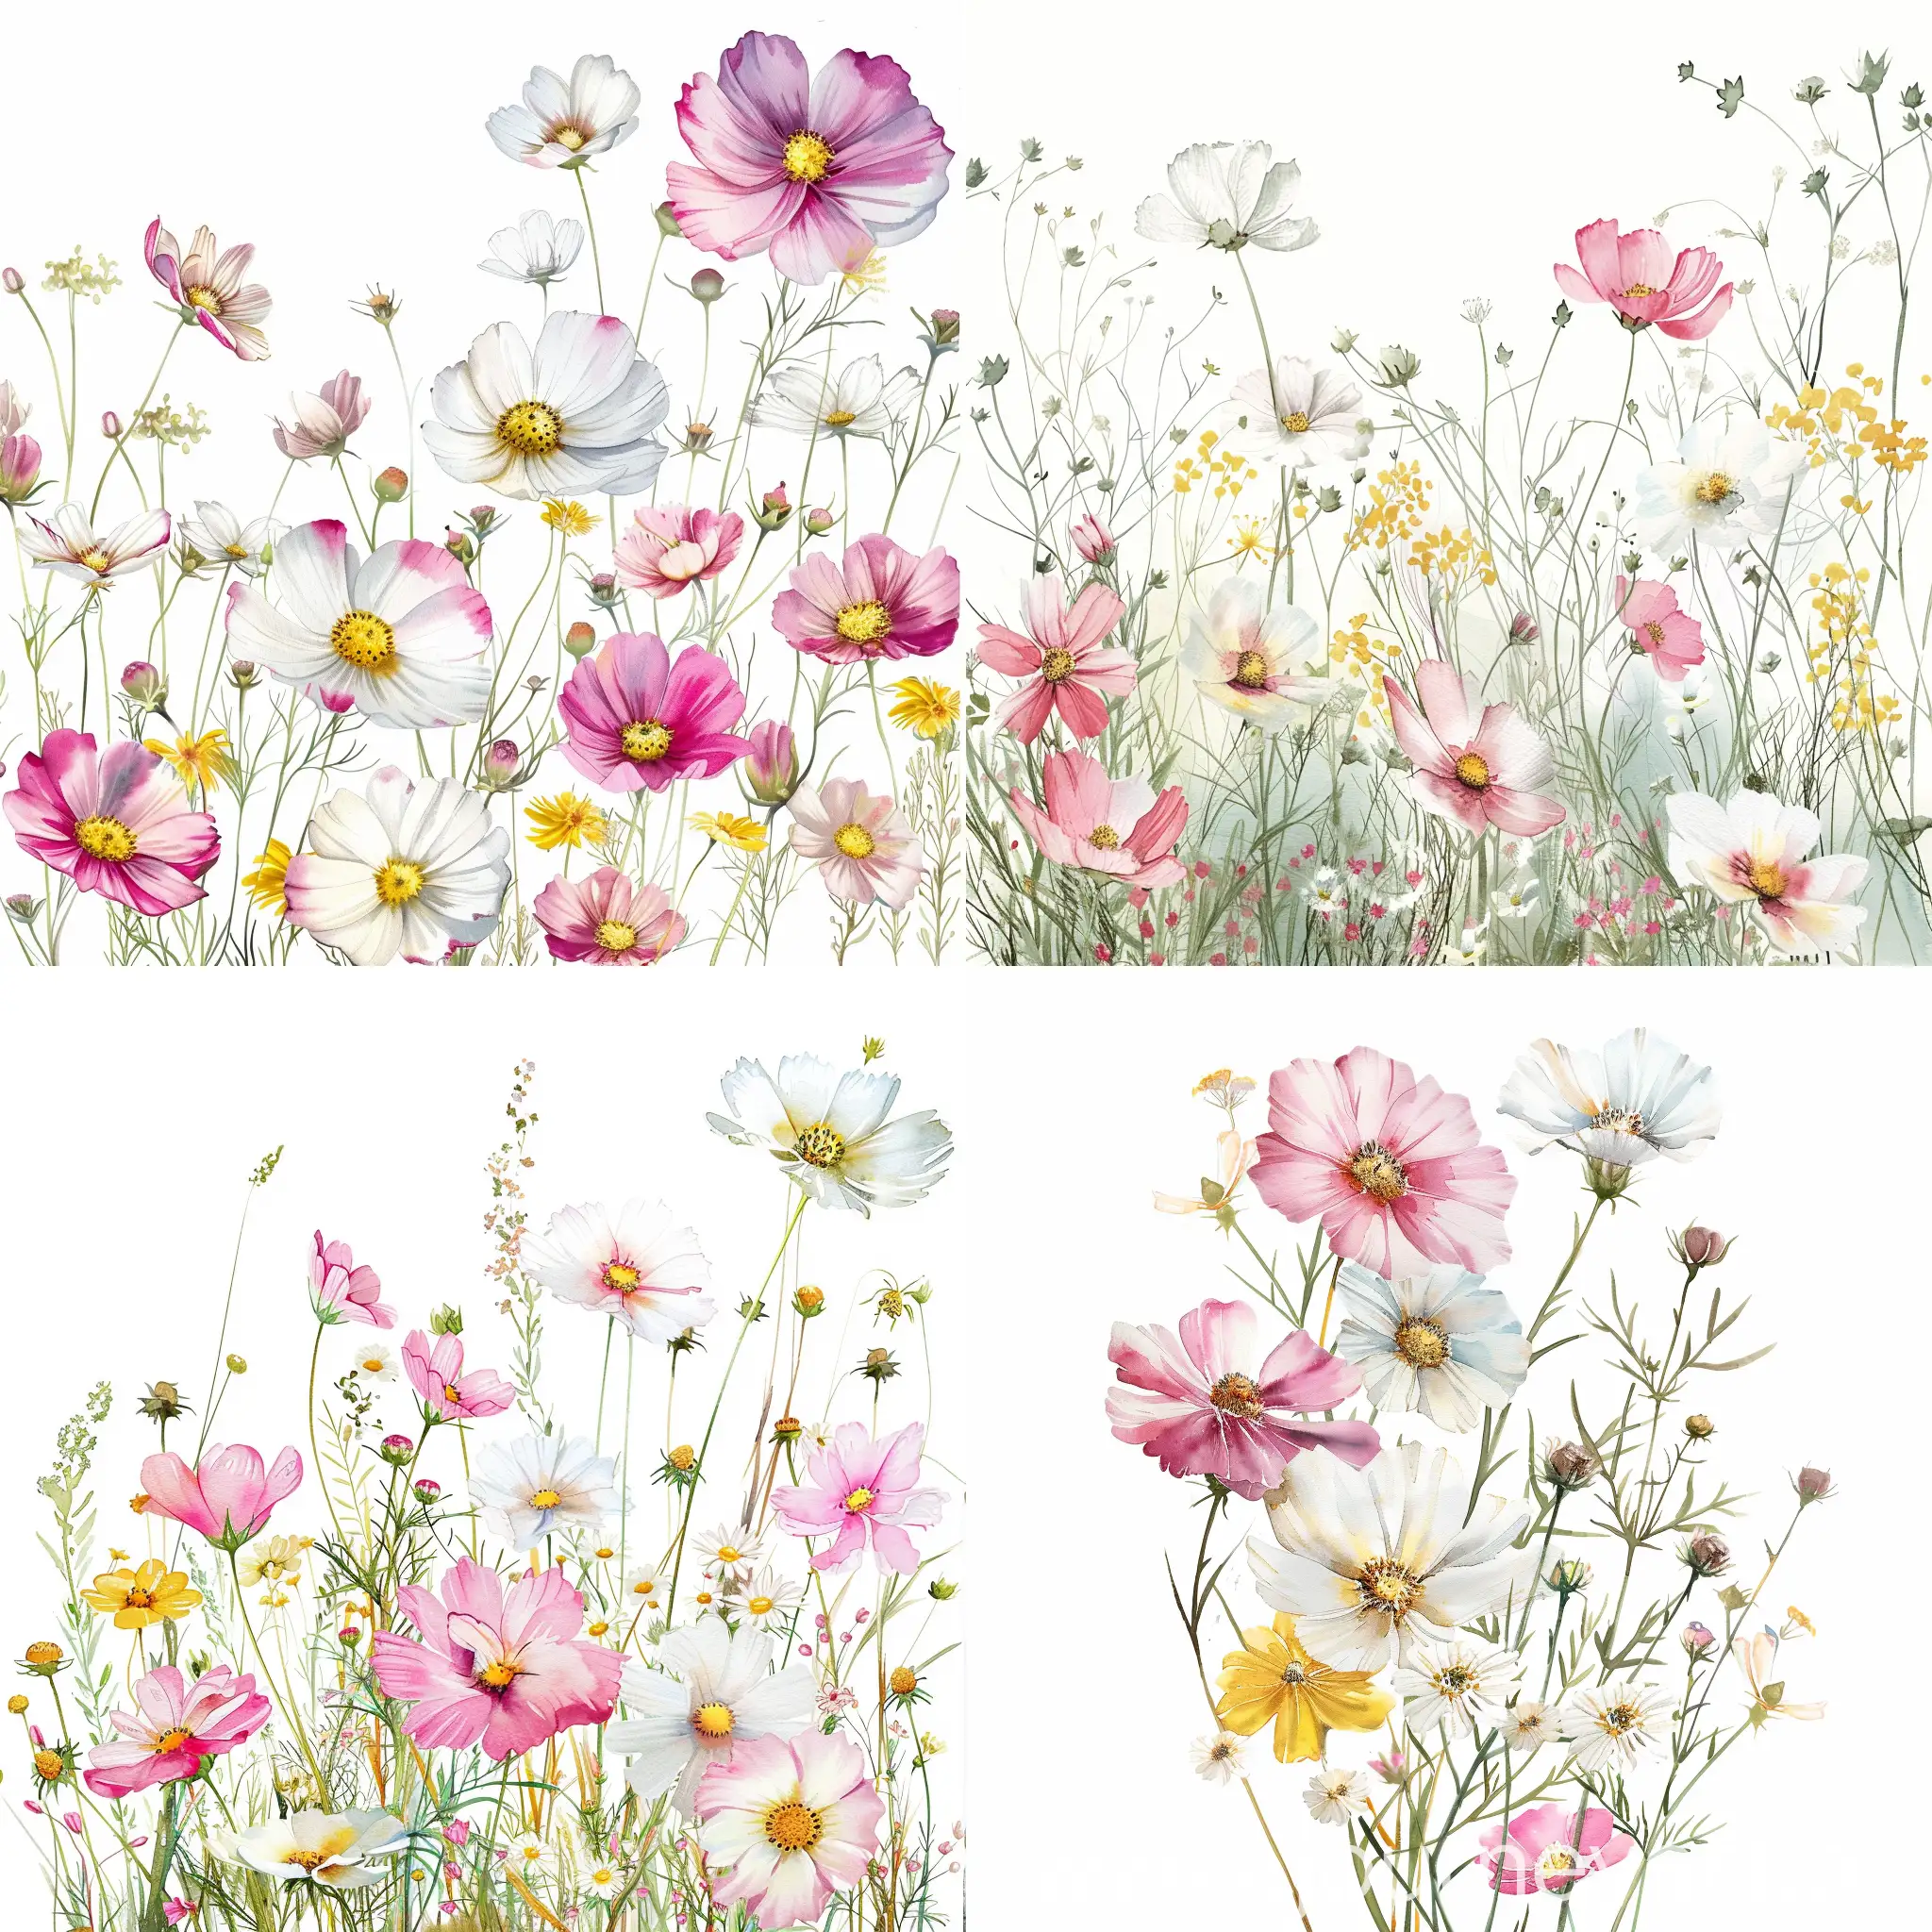 Dreamy beautiful watercolor wildflowers, pink and white and yellow, on white background